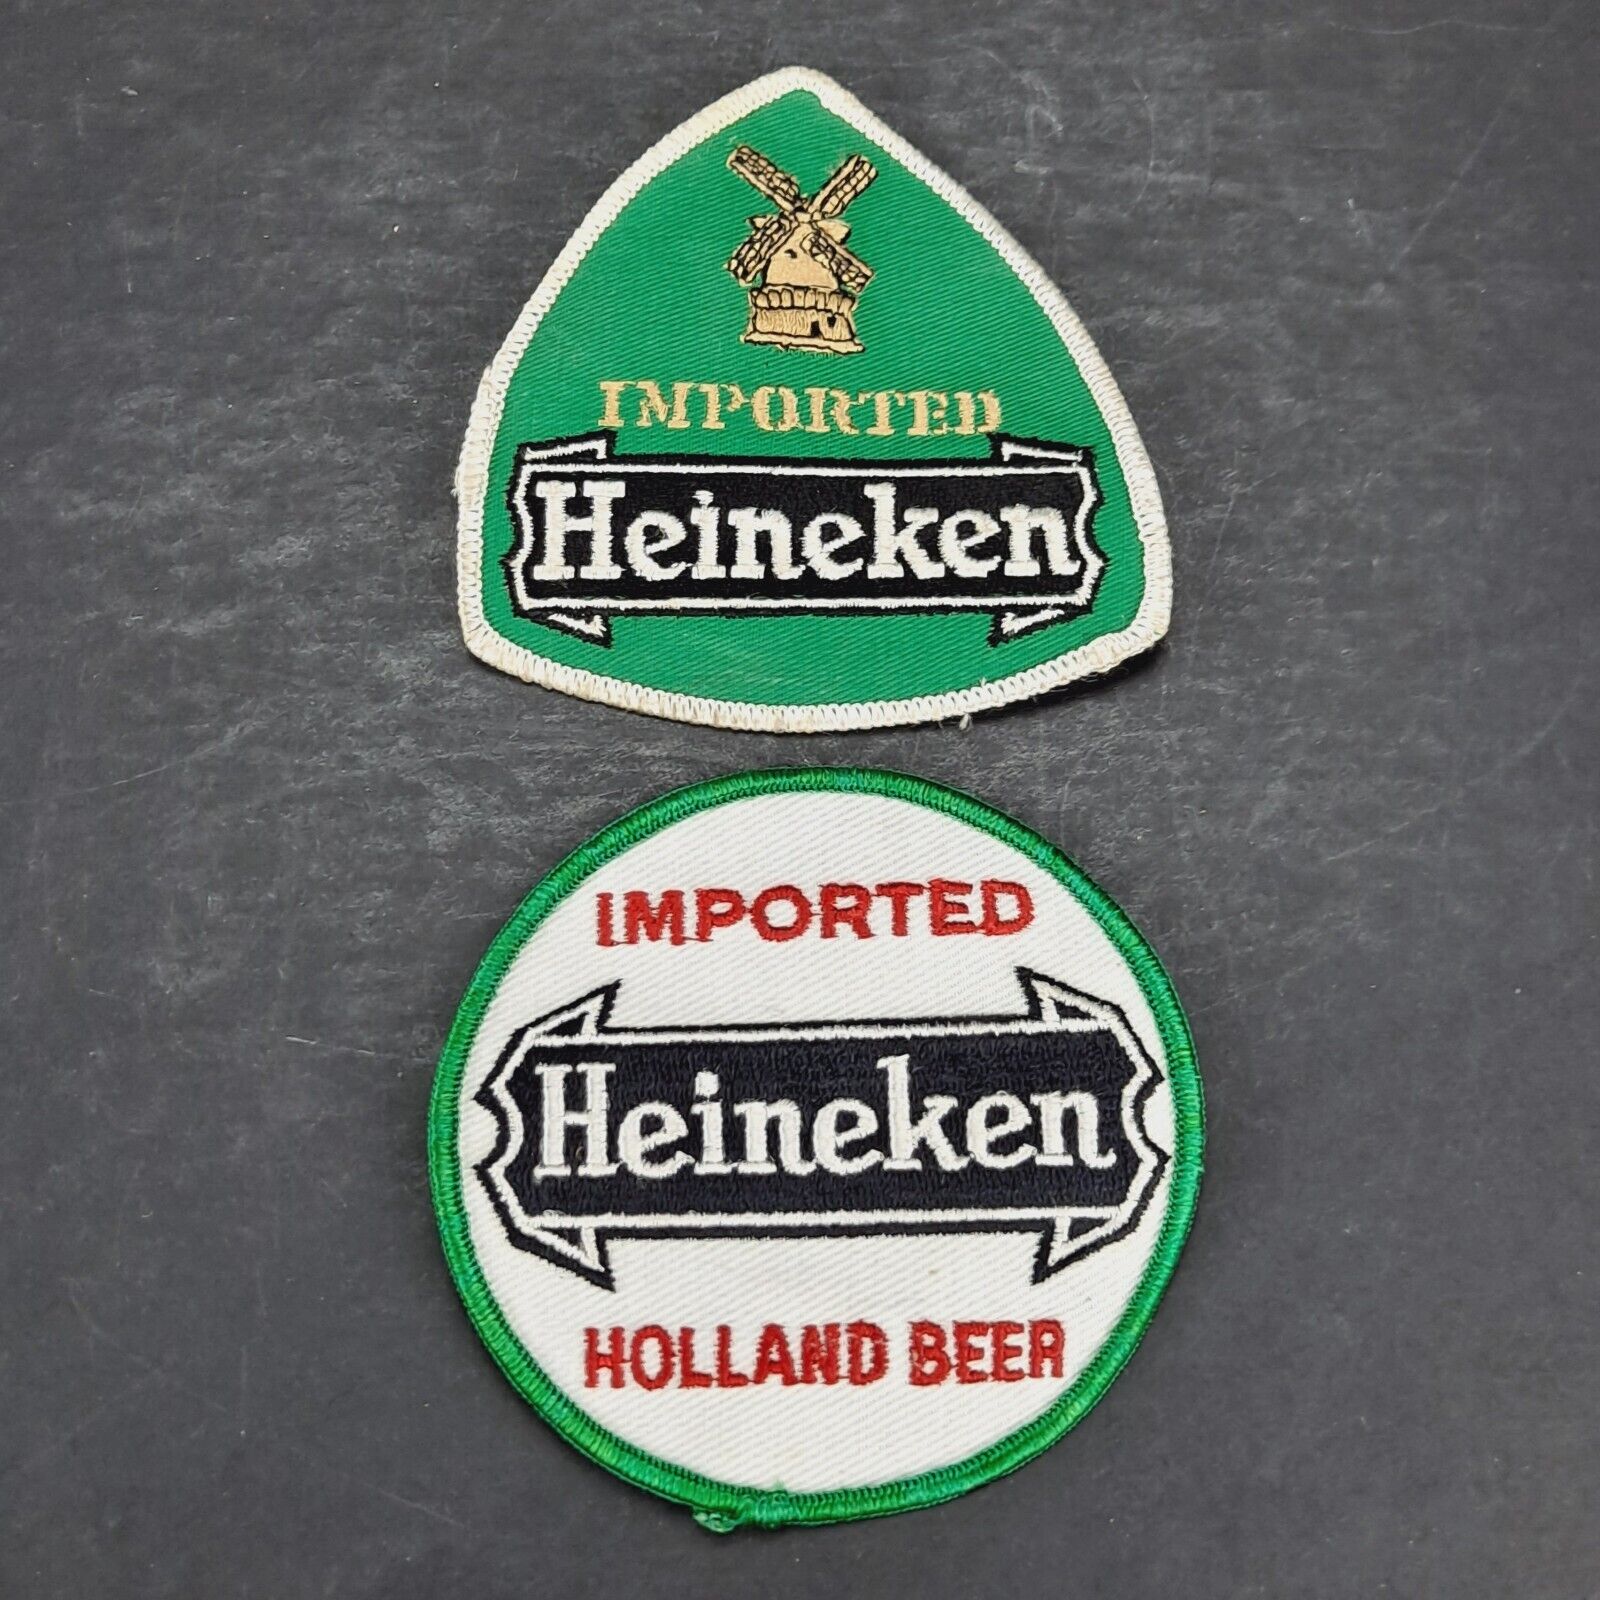 TWO VINTAGE IMPORTED HEINEKEN BEER EMBOIDERED CLOTH DISTRIBUTOR PATCHES